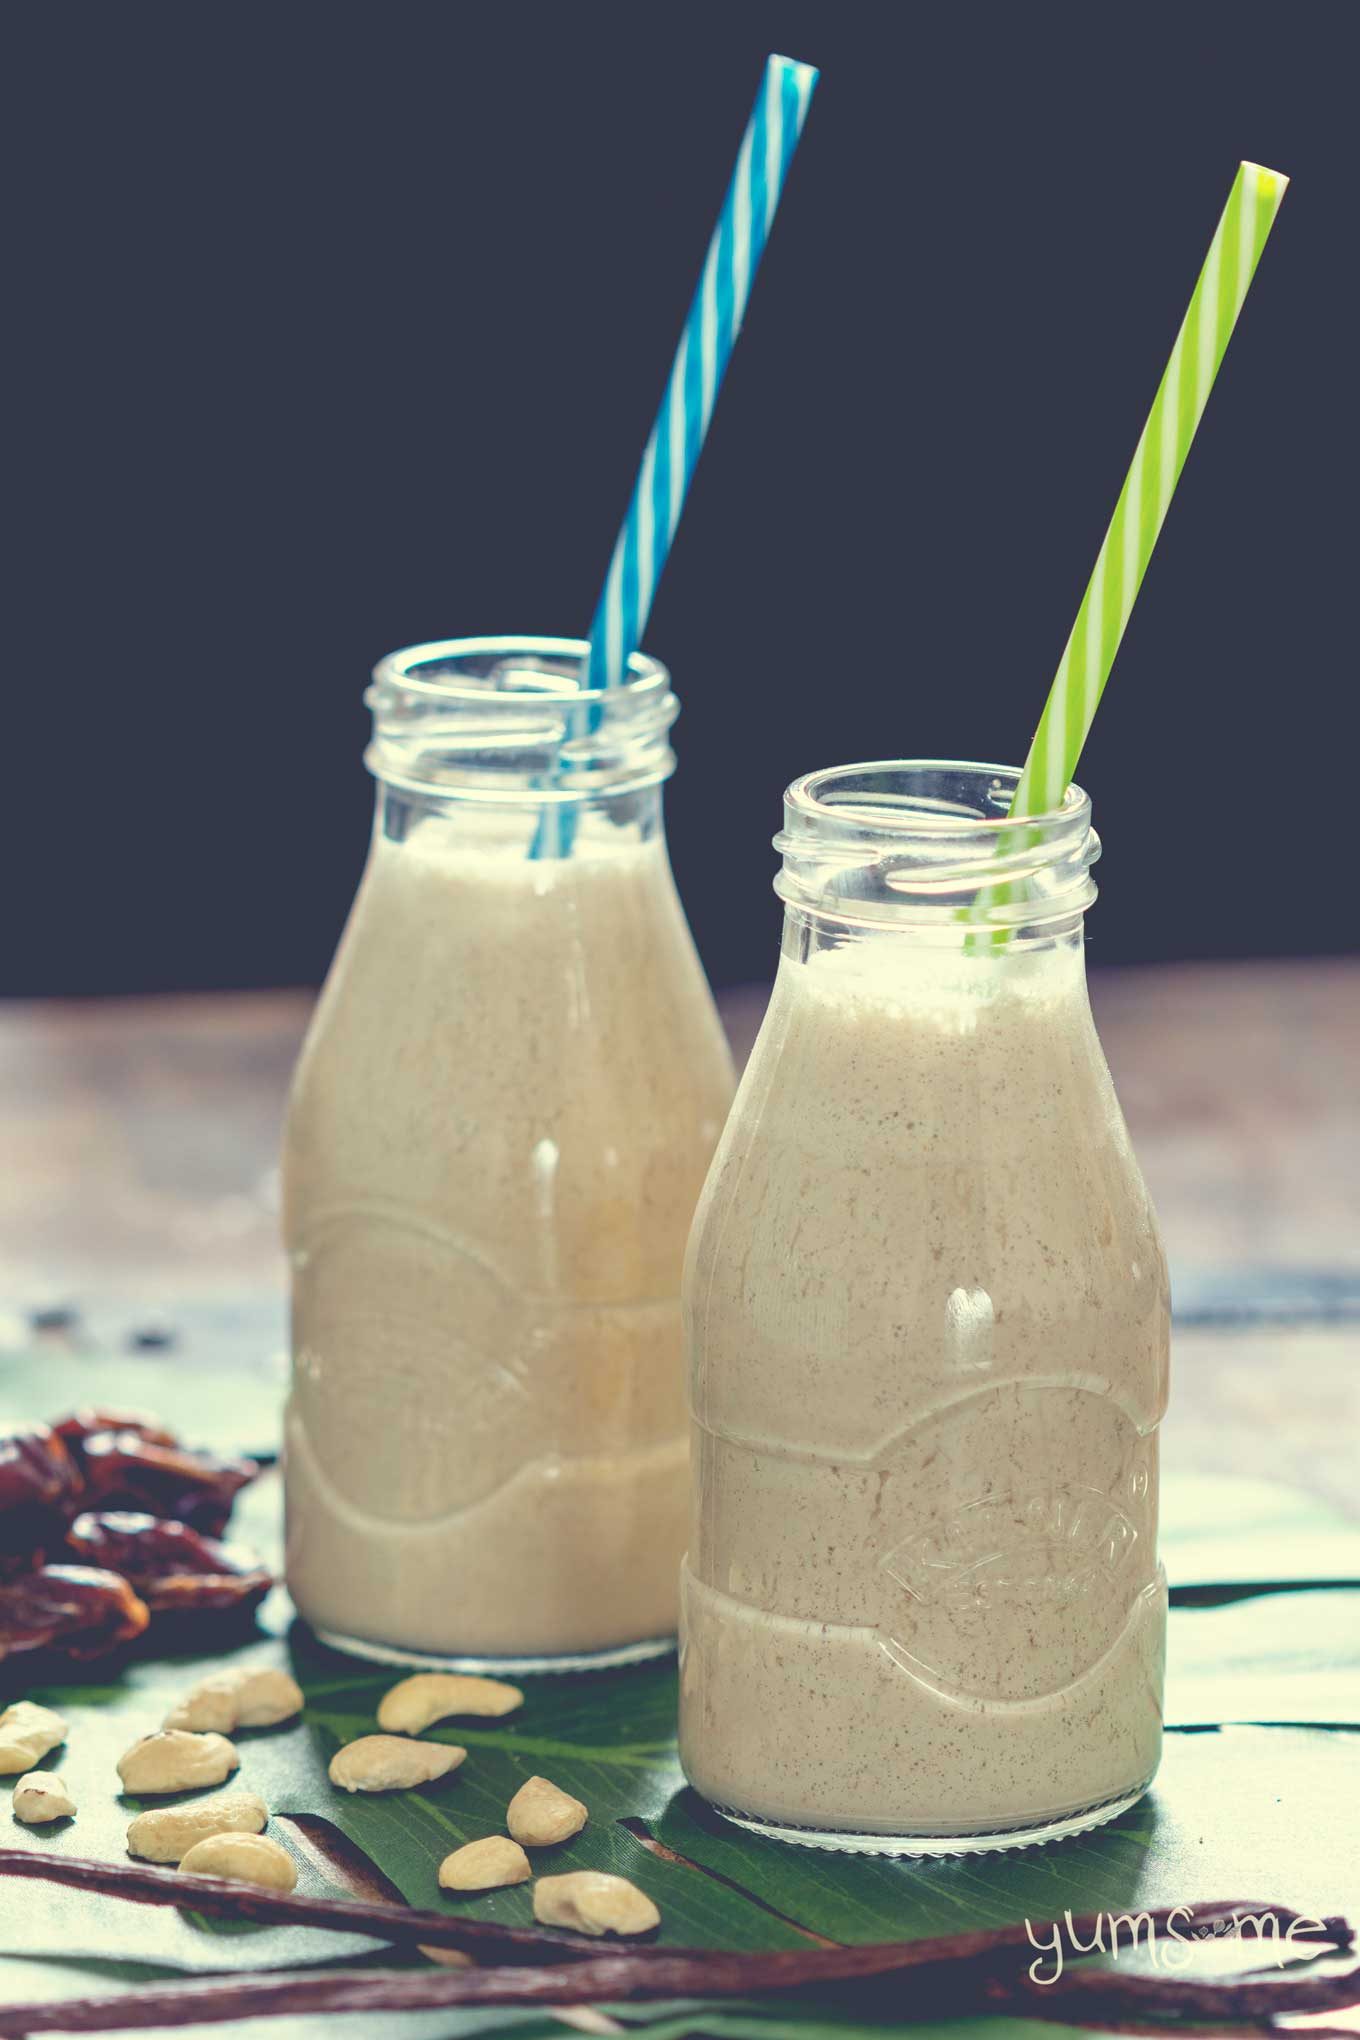 Two bottles of cashew milk with coloured straws, on a wooden table, surrounded by dates, cashews, and vanilla pods.